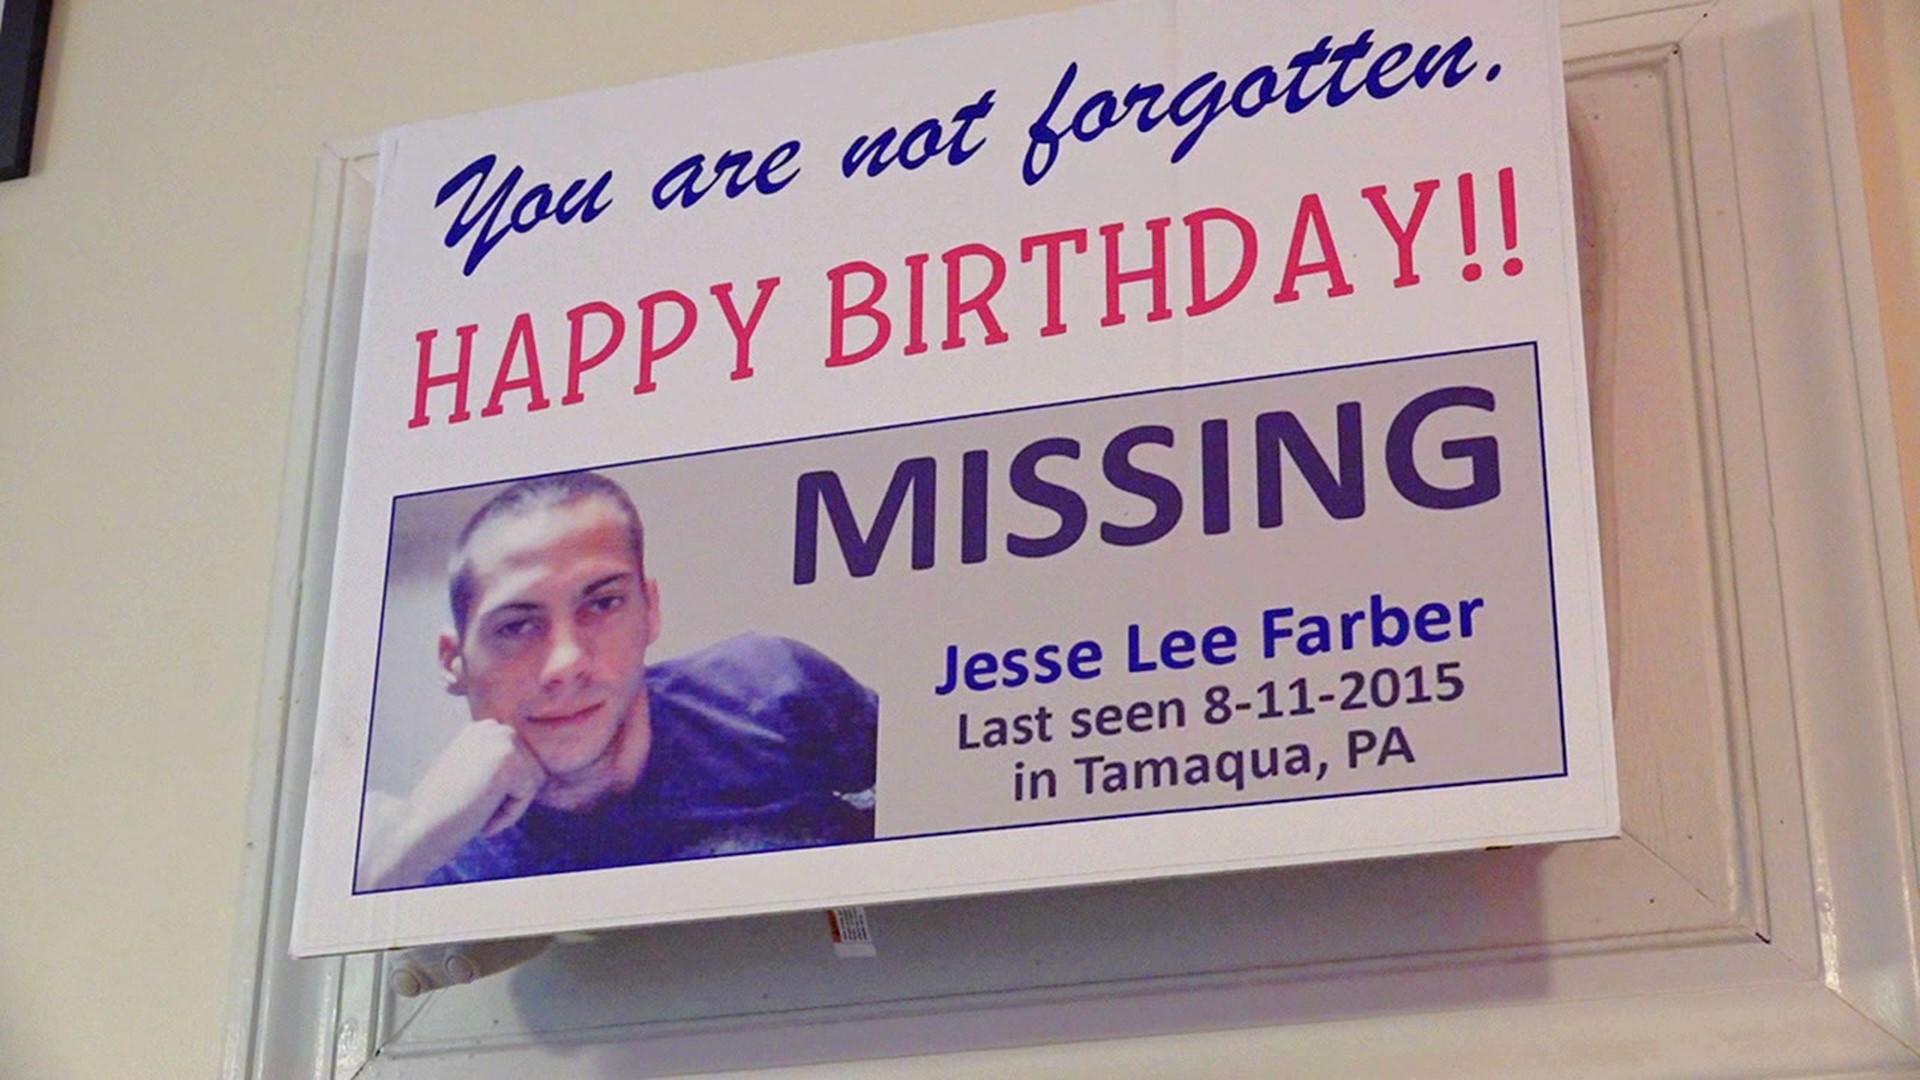 A mother in Schuylkill County hopes a new law going into effect will find her missing son.